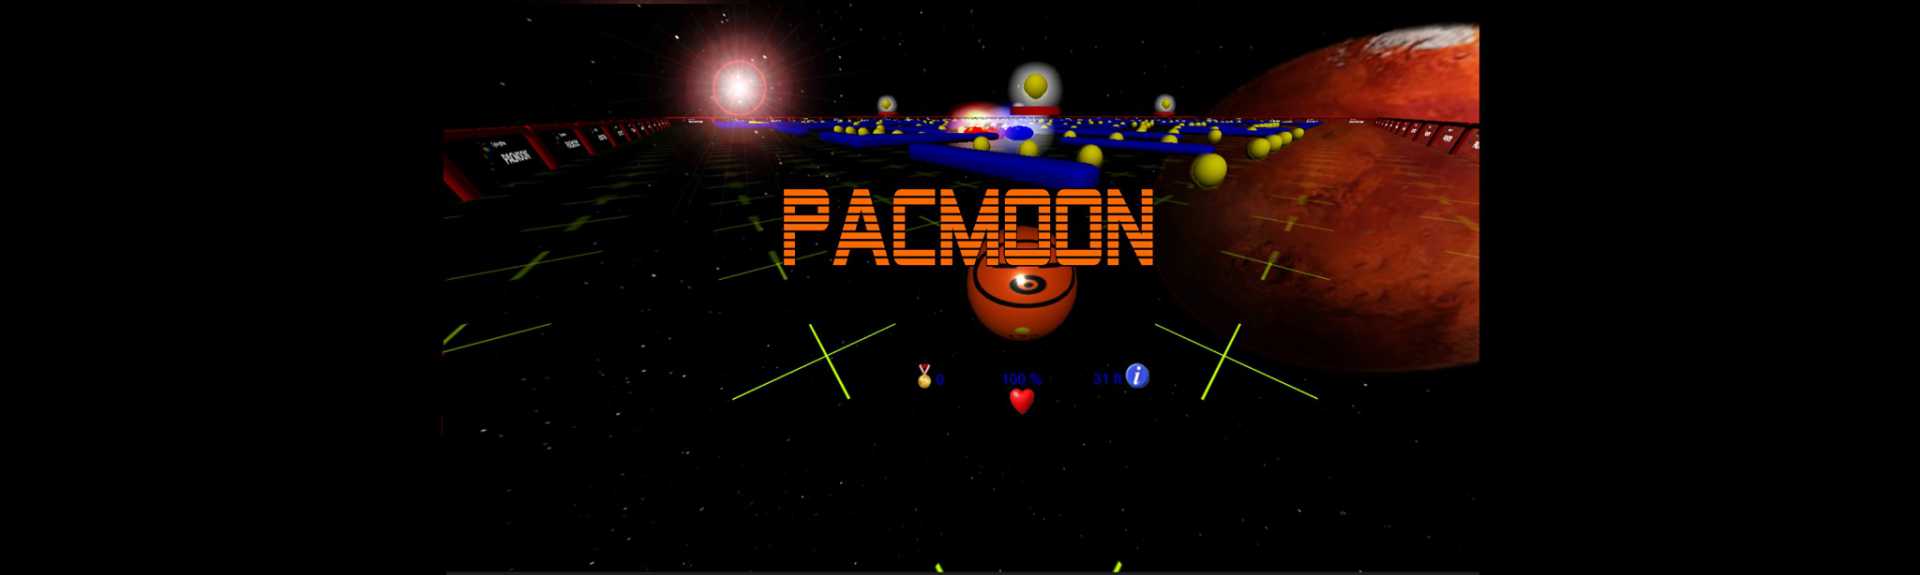 Pacmoon